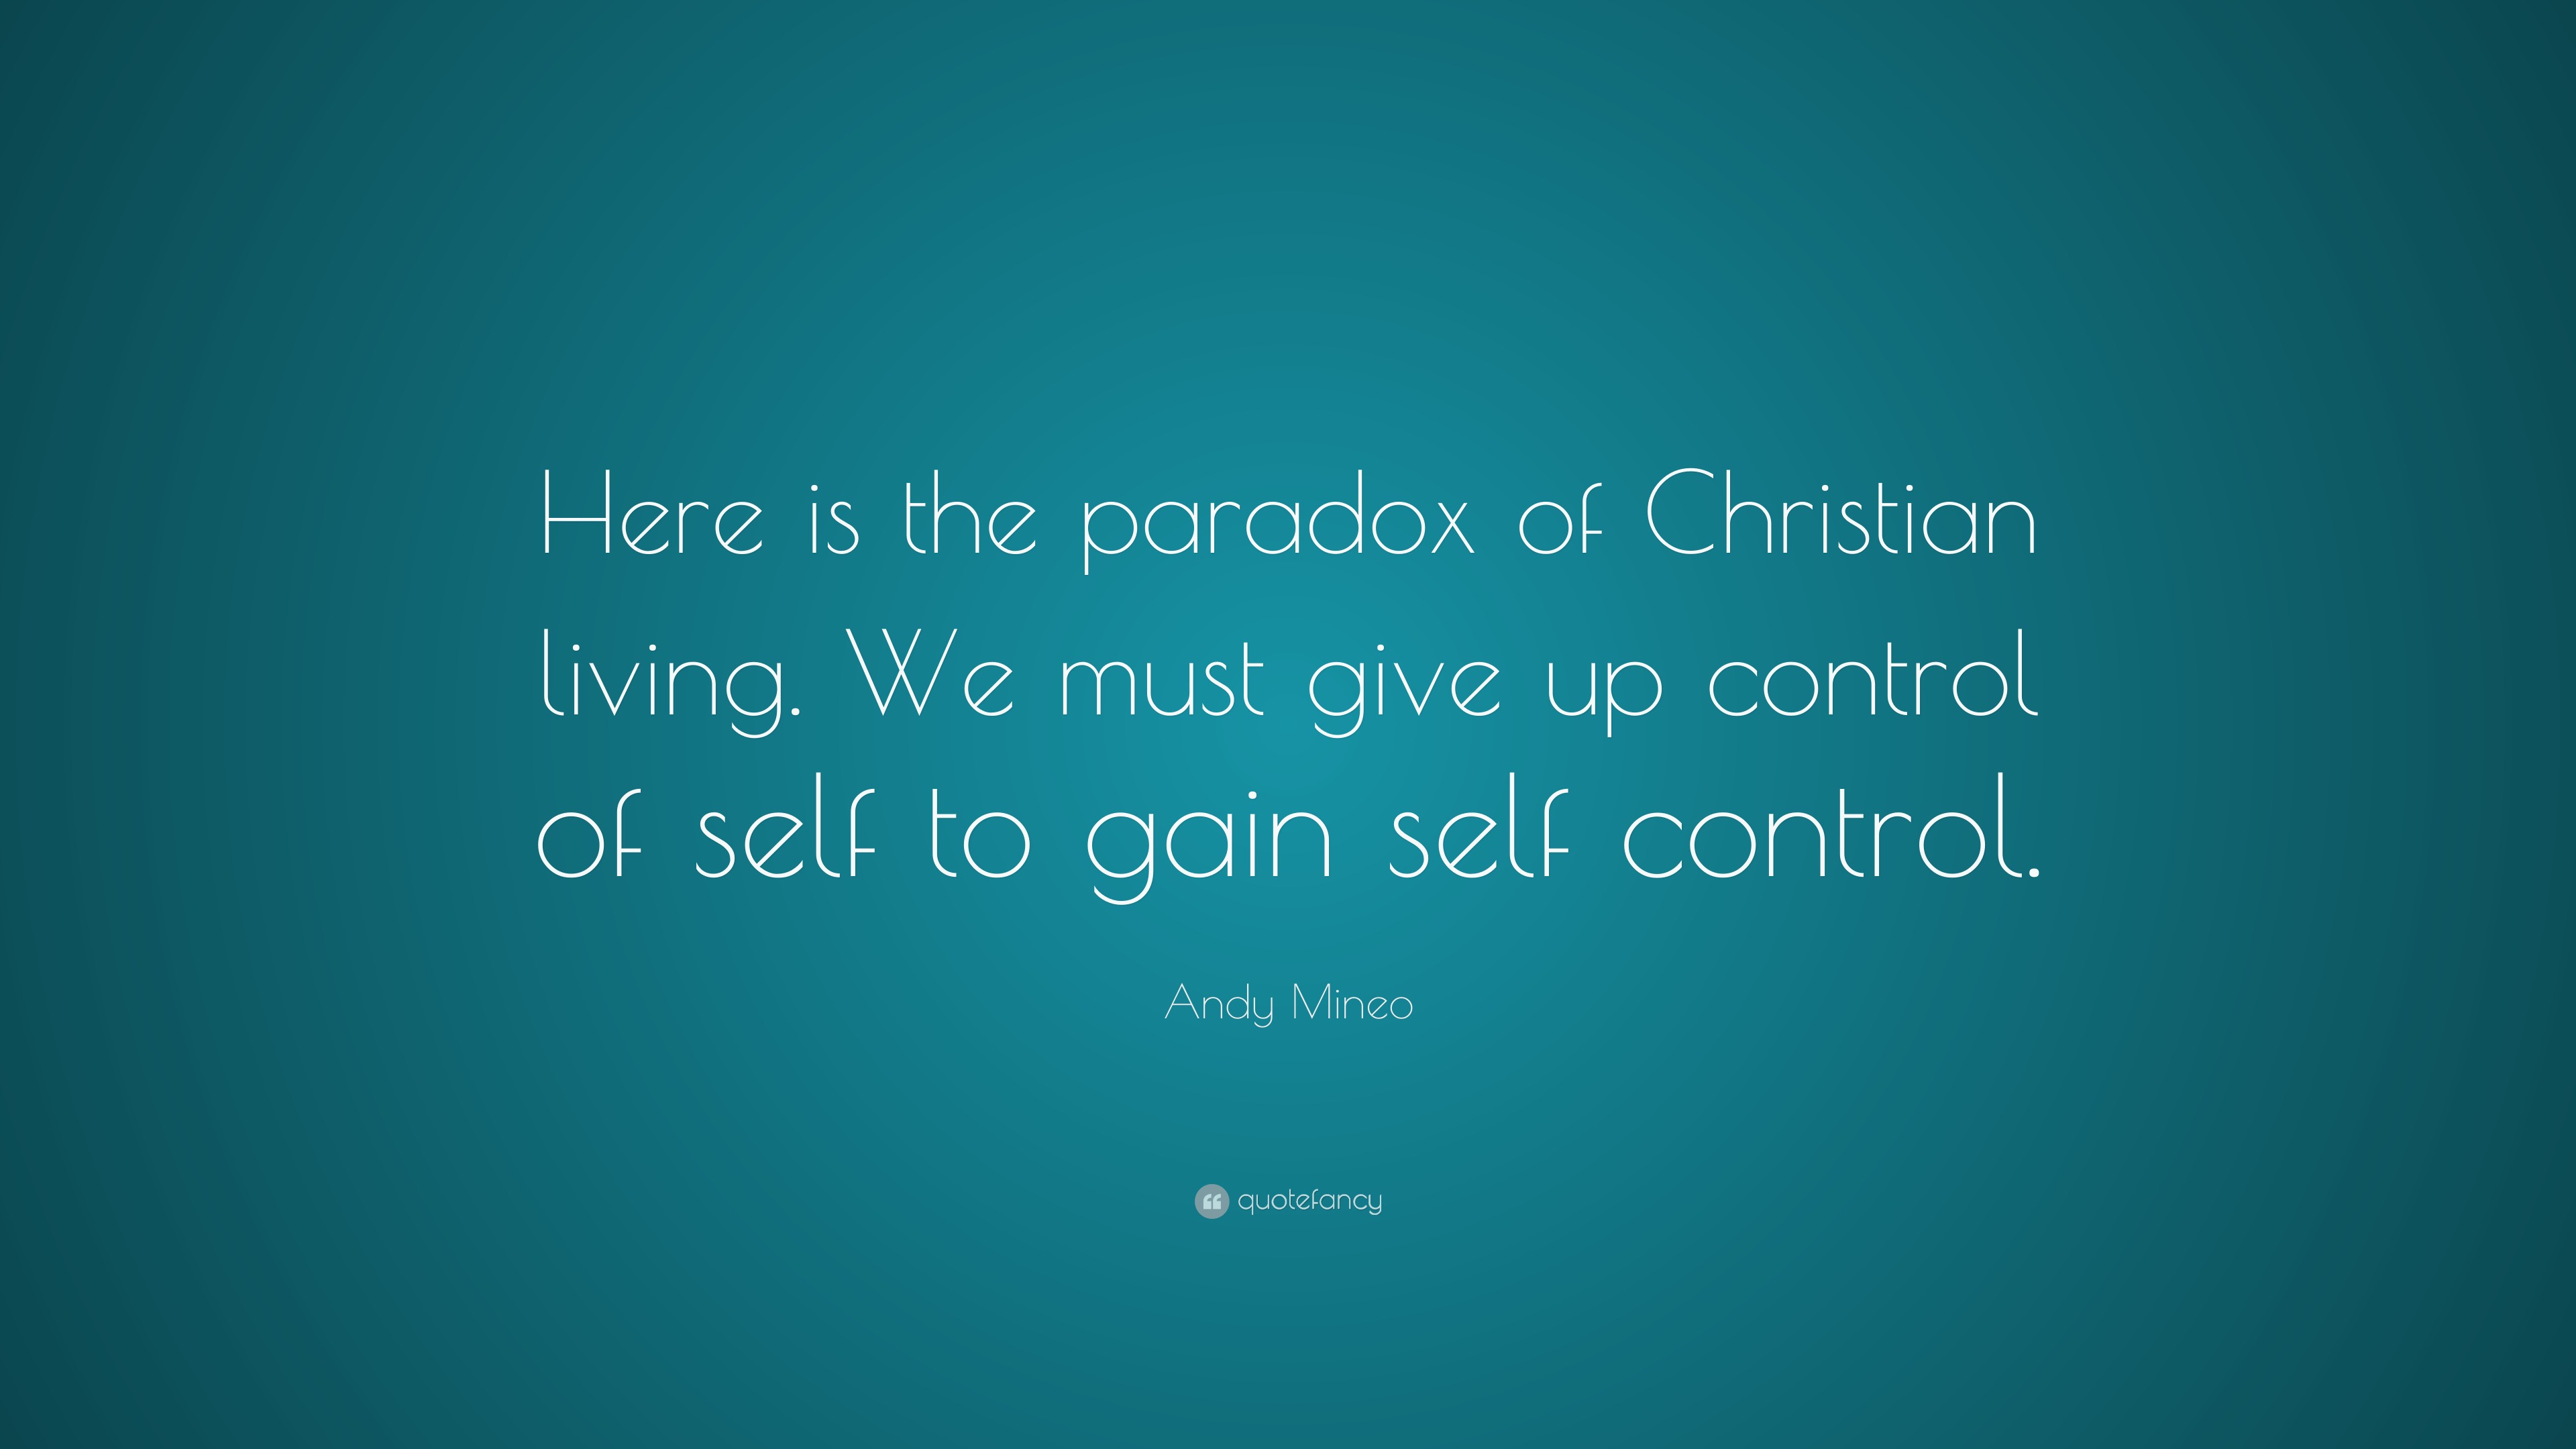 Andy Mineo Quote: “Here is the paradox of Christian living. We must